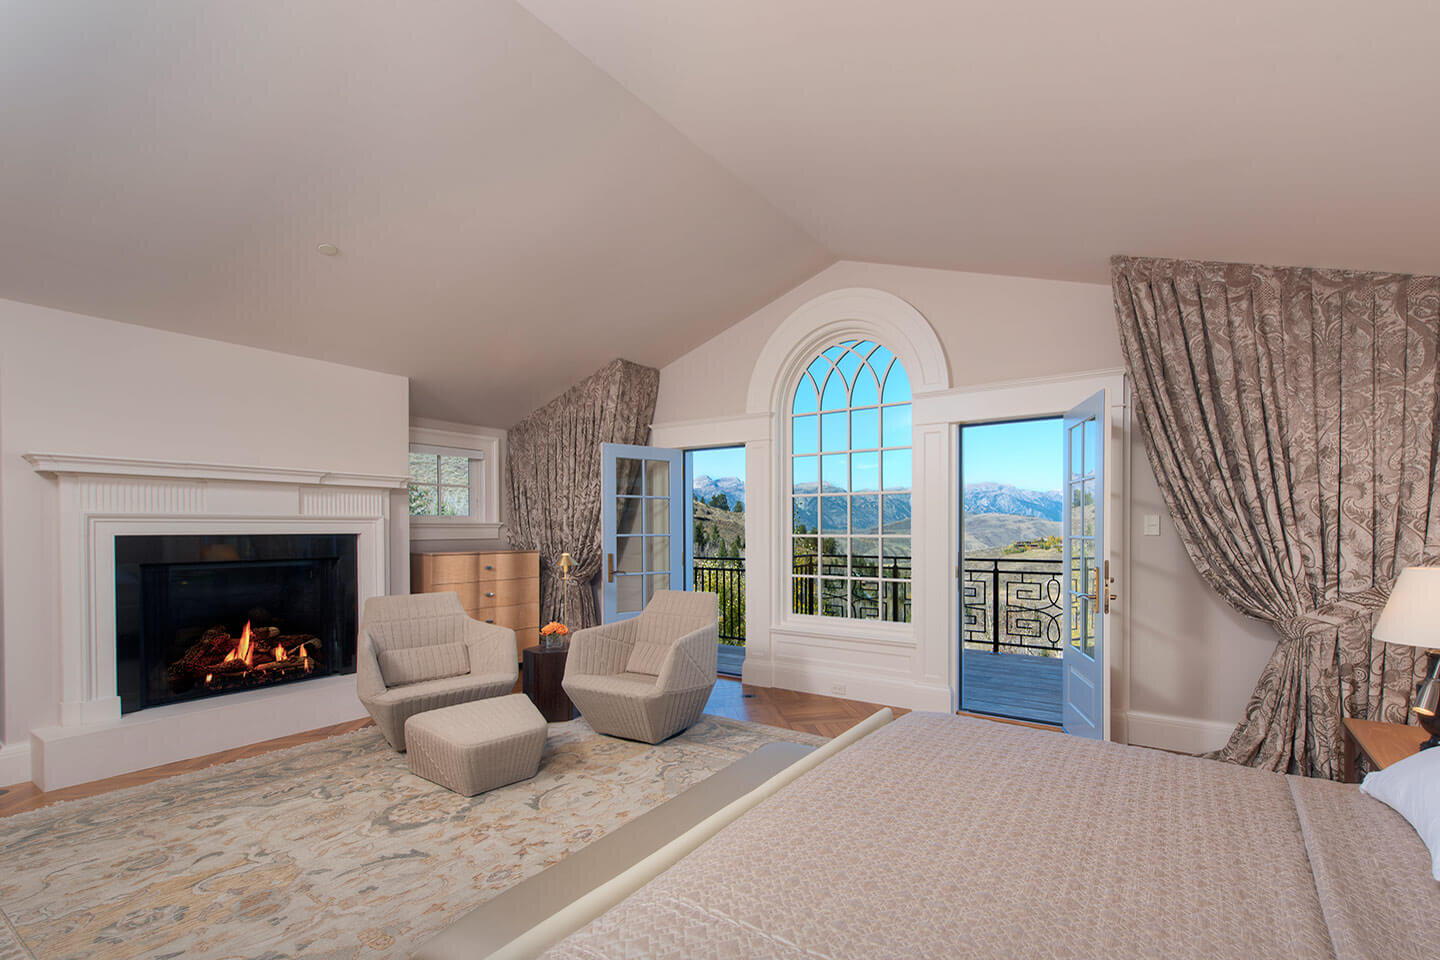 Master bedroom with arched window and fireplace